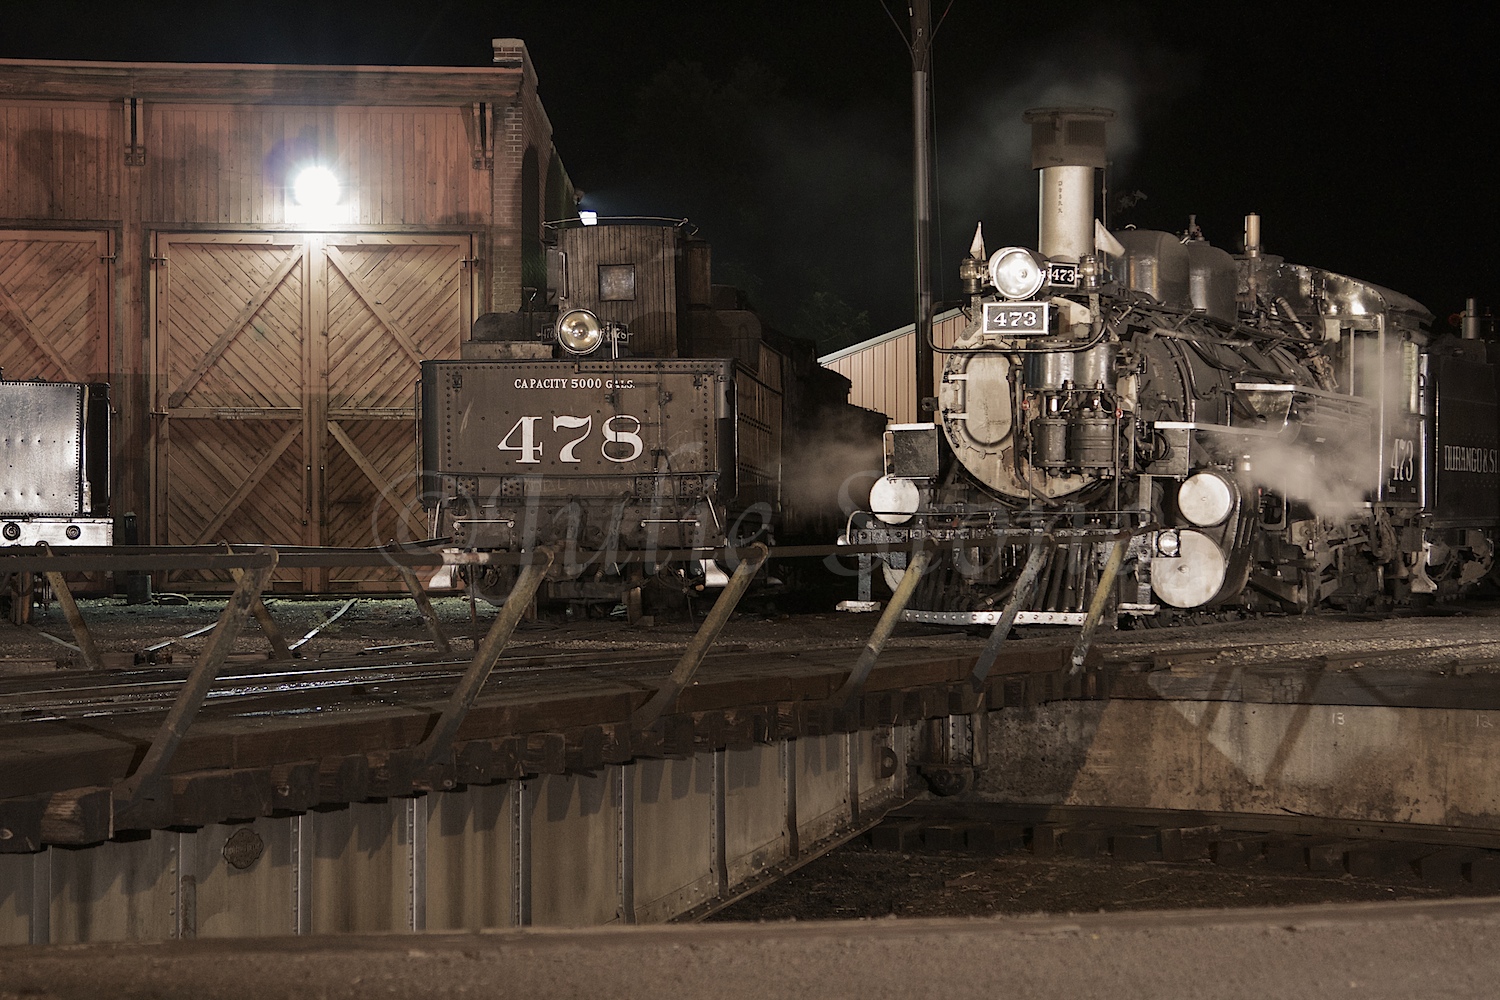 Engine 473 and 478 Fall Night Shoot 2014